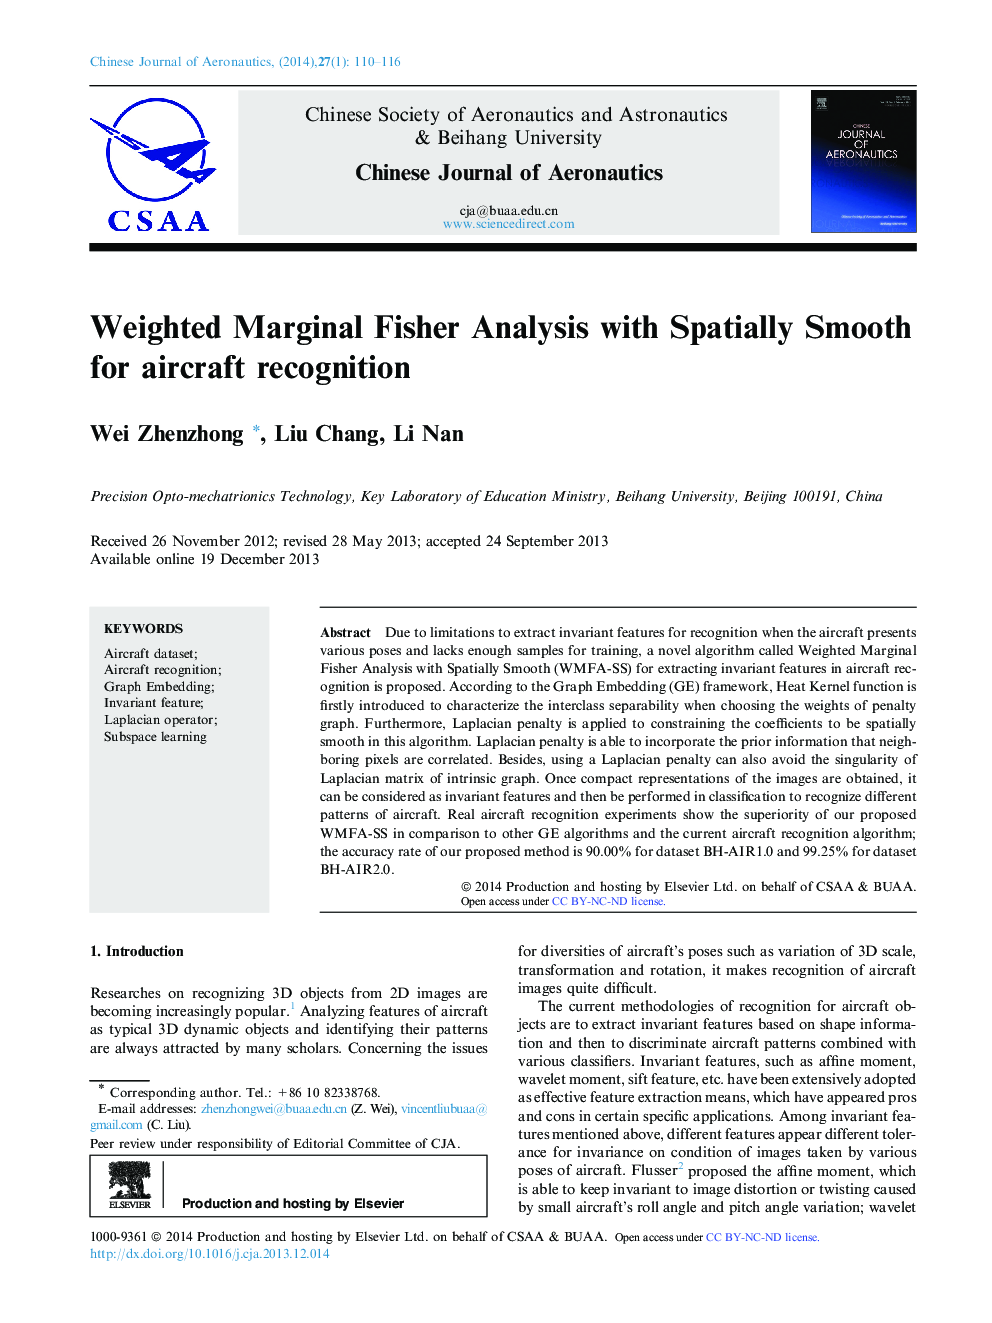 Weighted Marginal Fisher Analysis with Spatially Smooth for aircraft recognition 